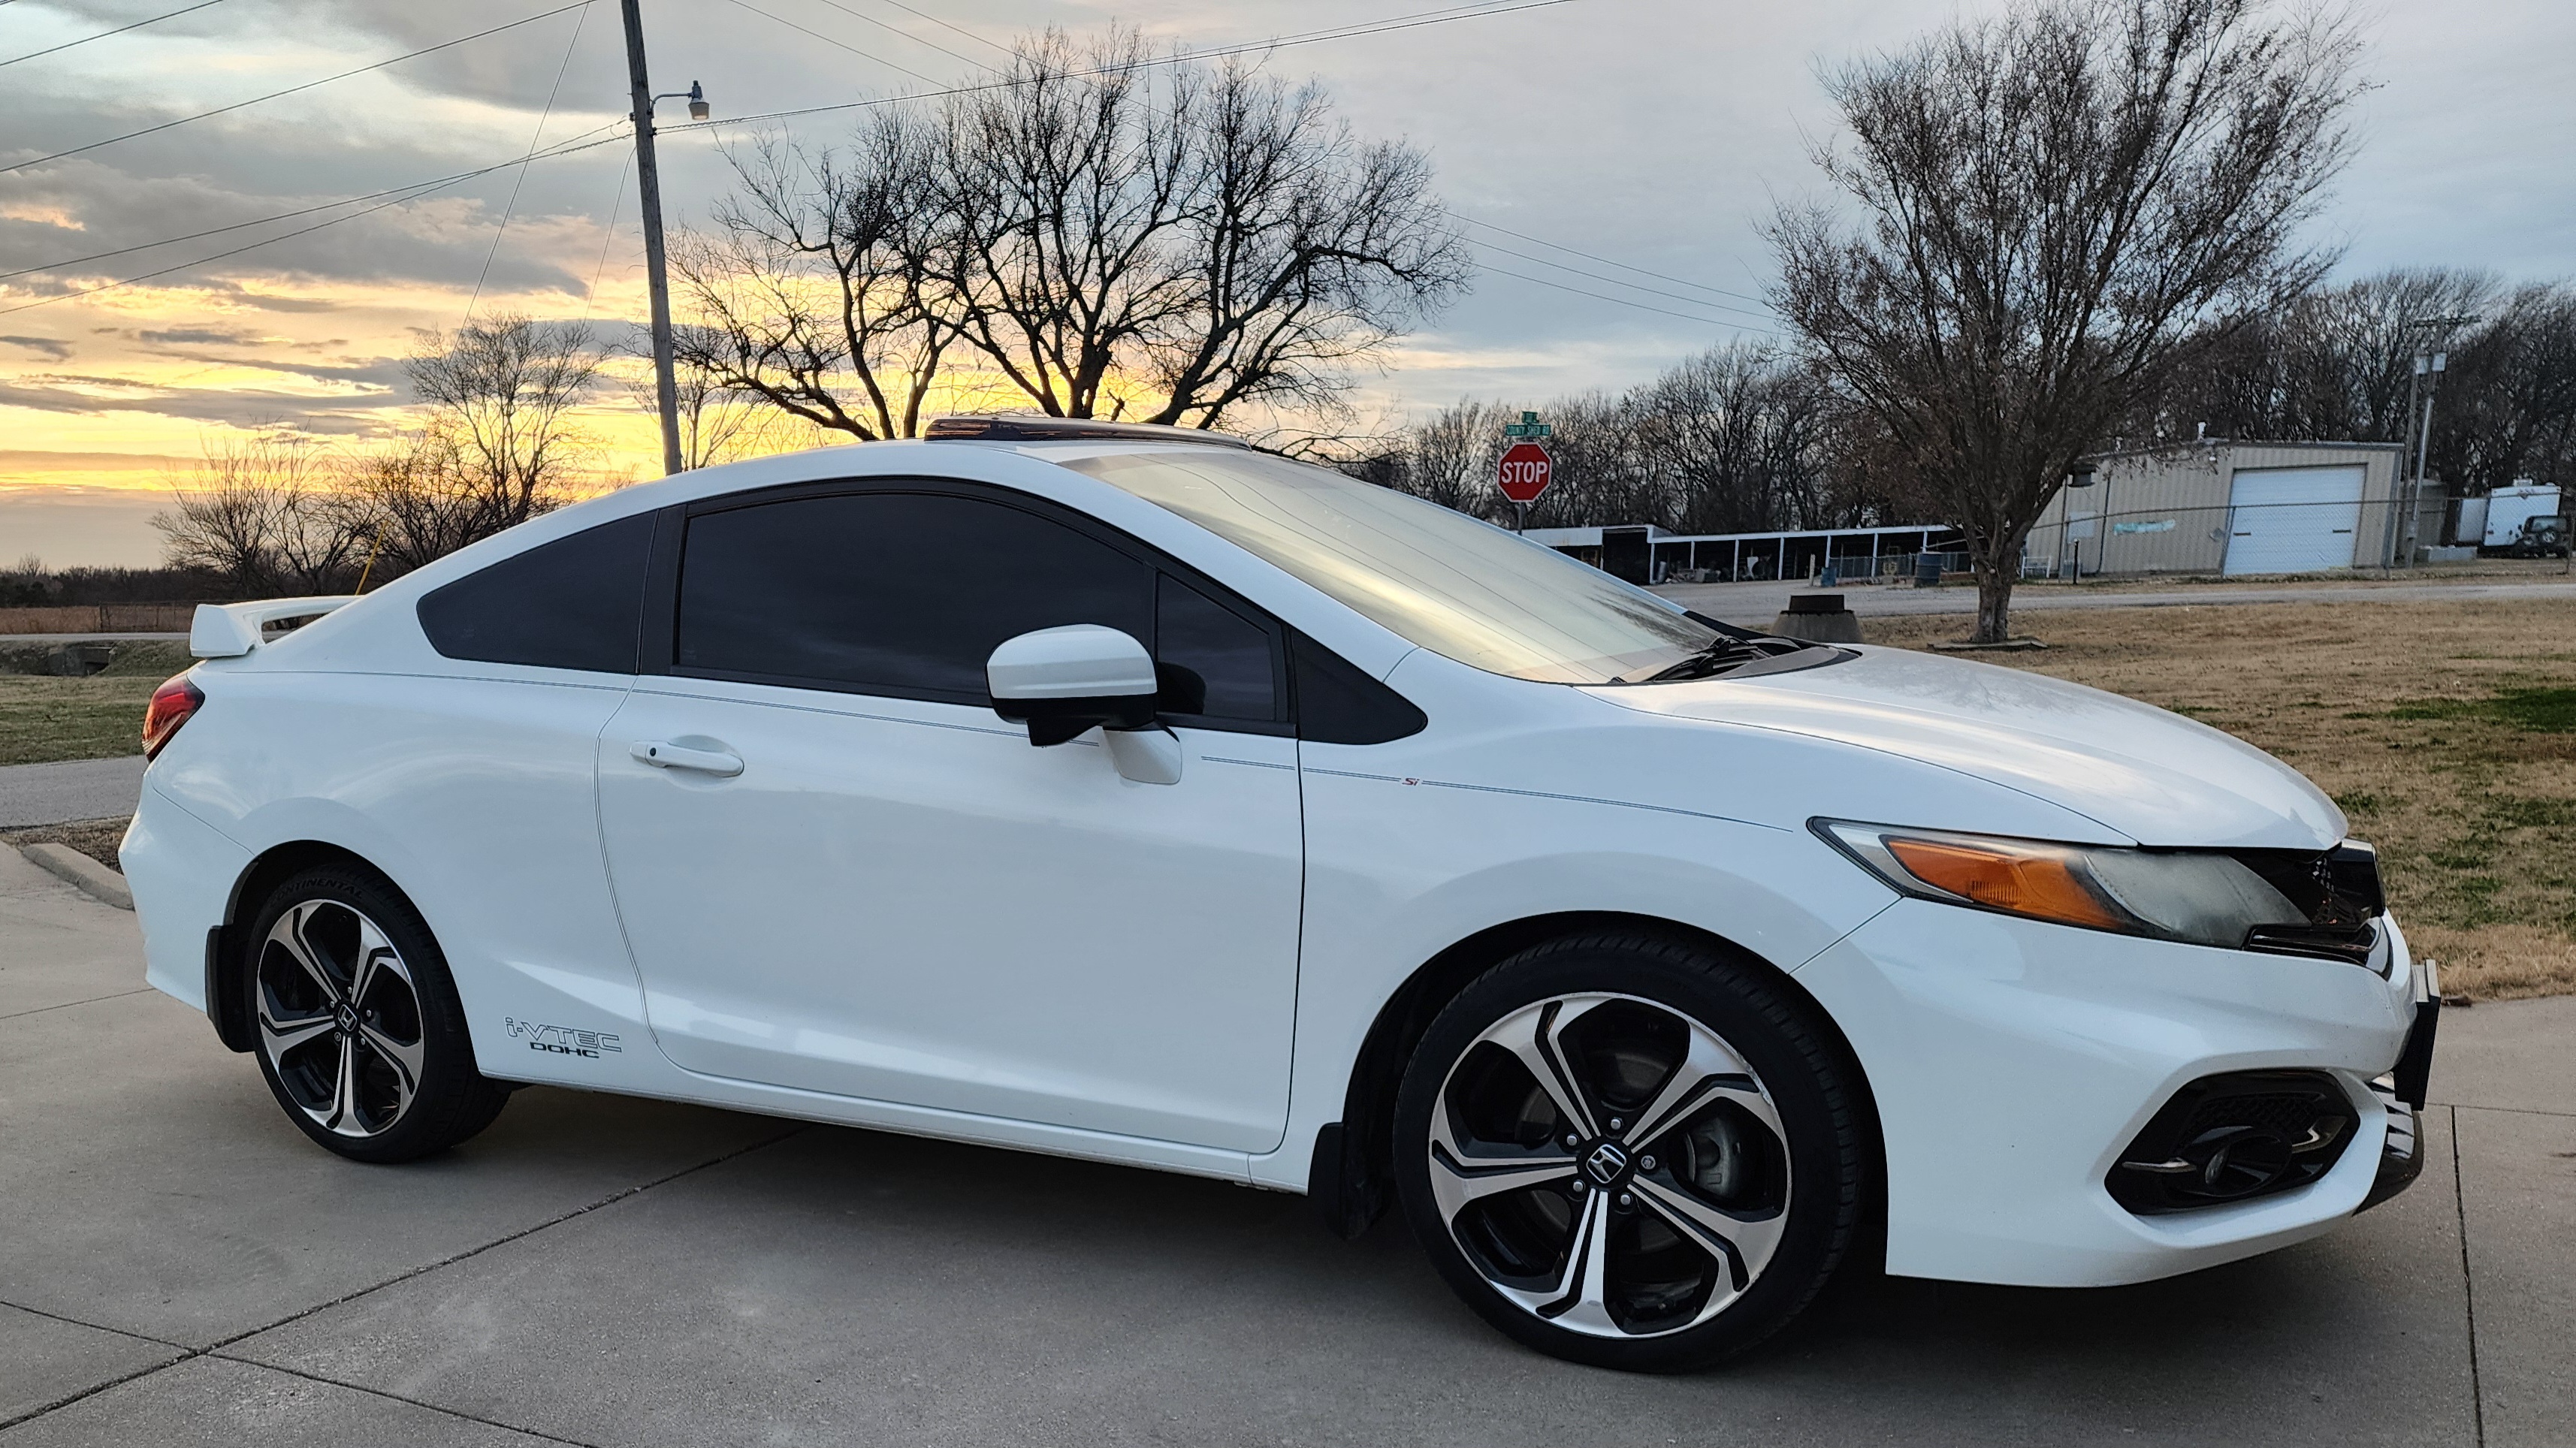 Used Honda Civic Si for Sale Right Now - Autotrader